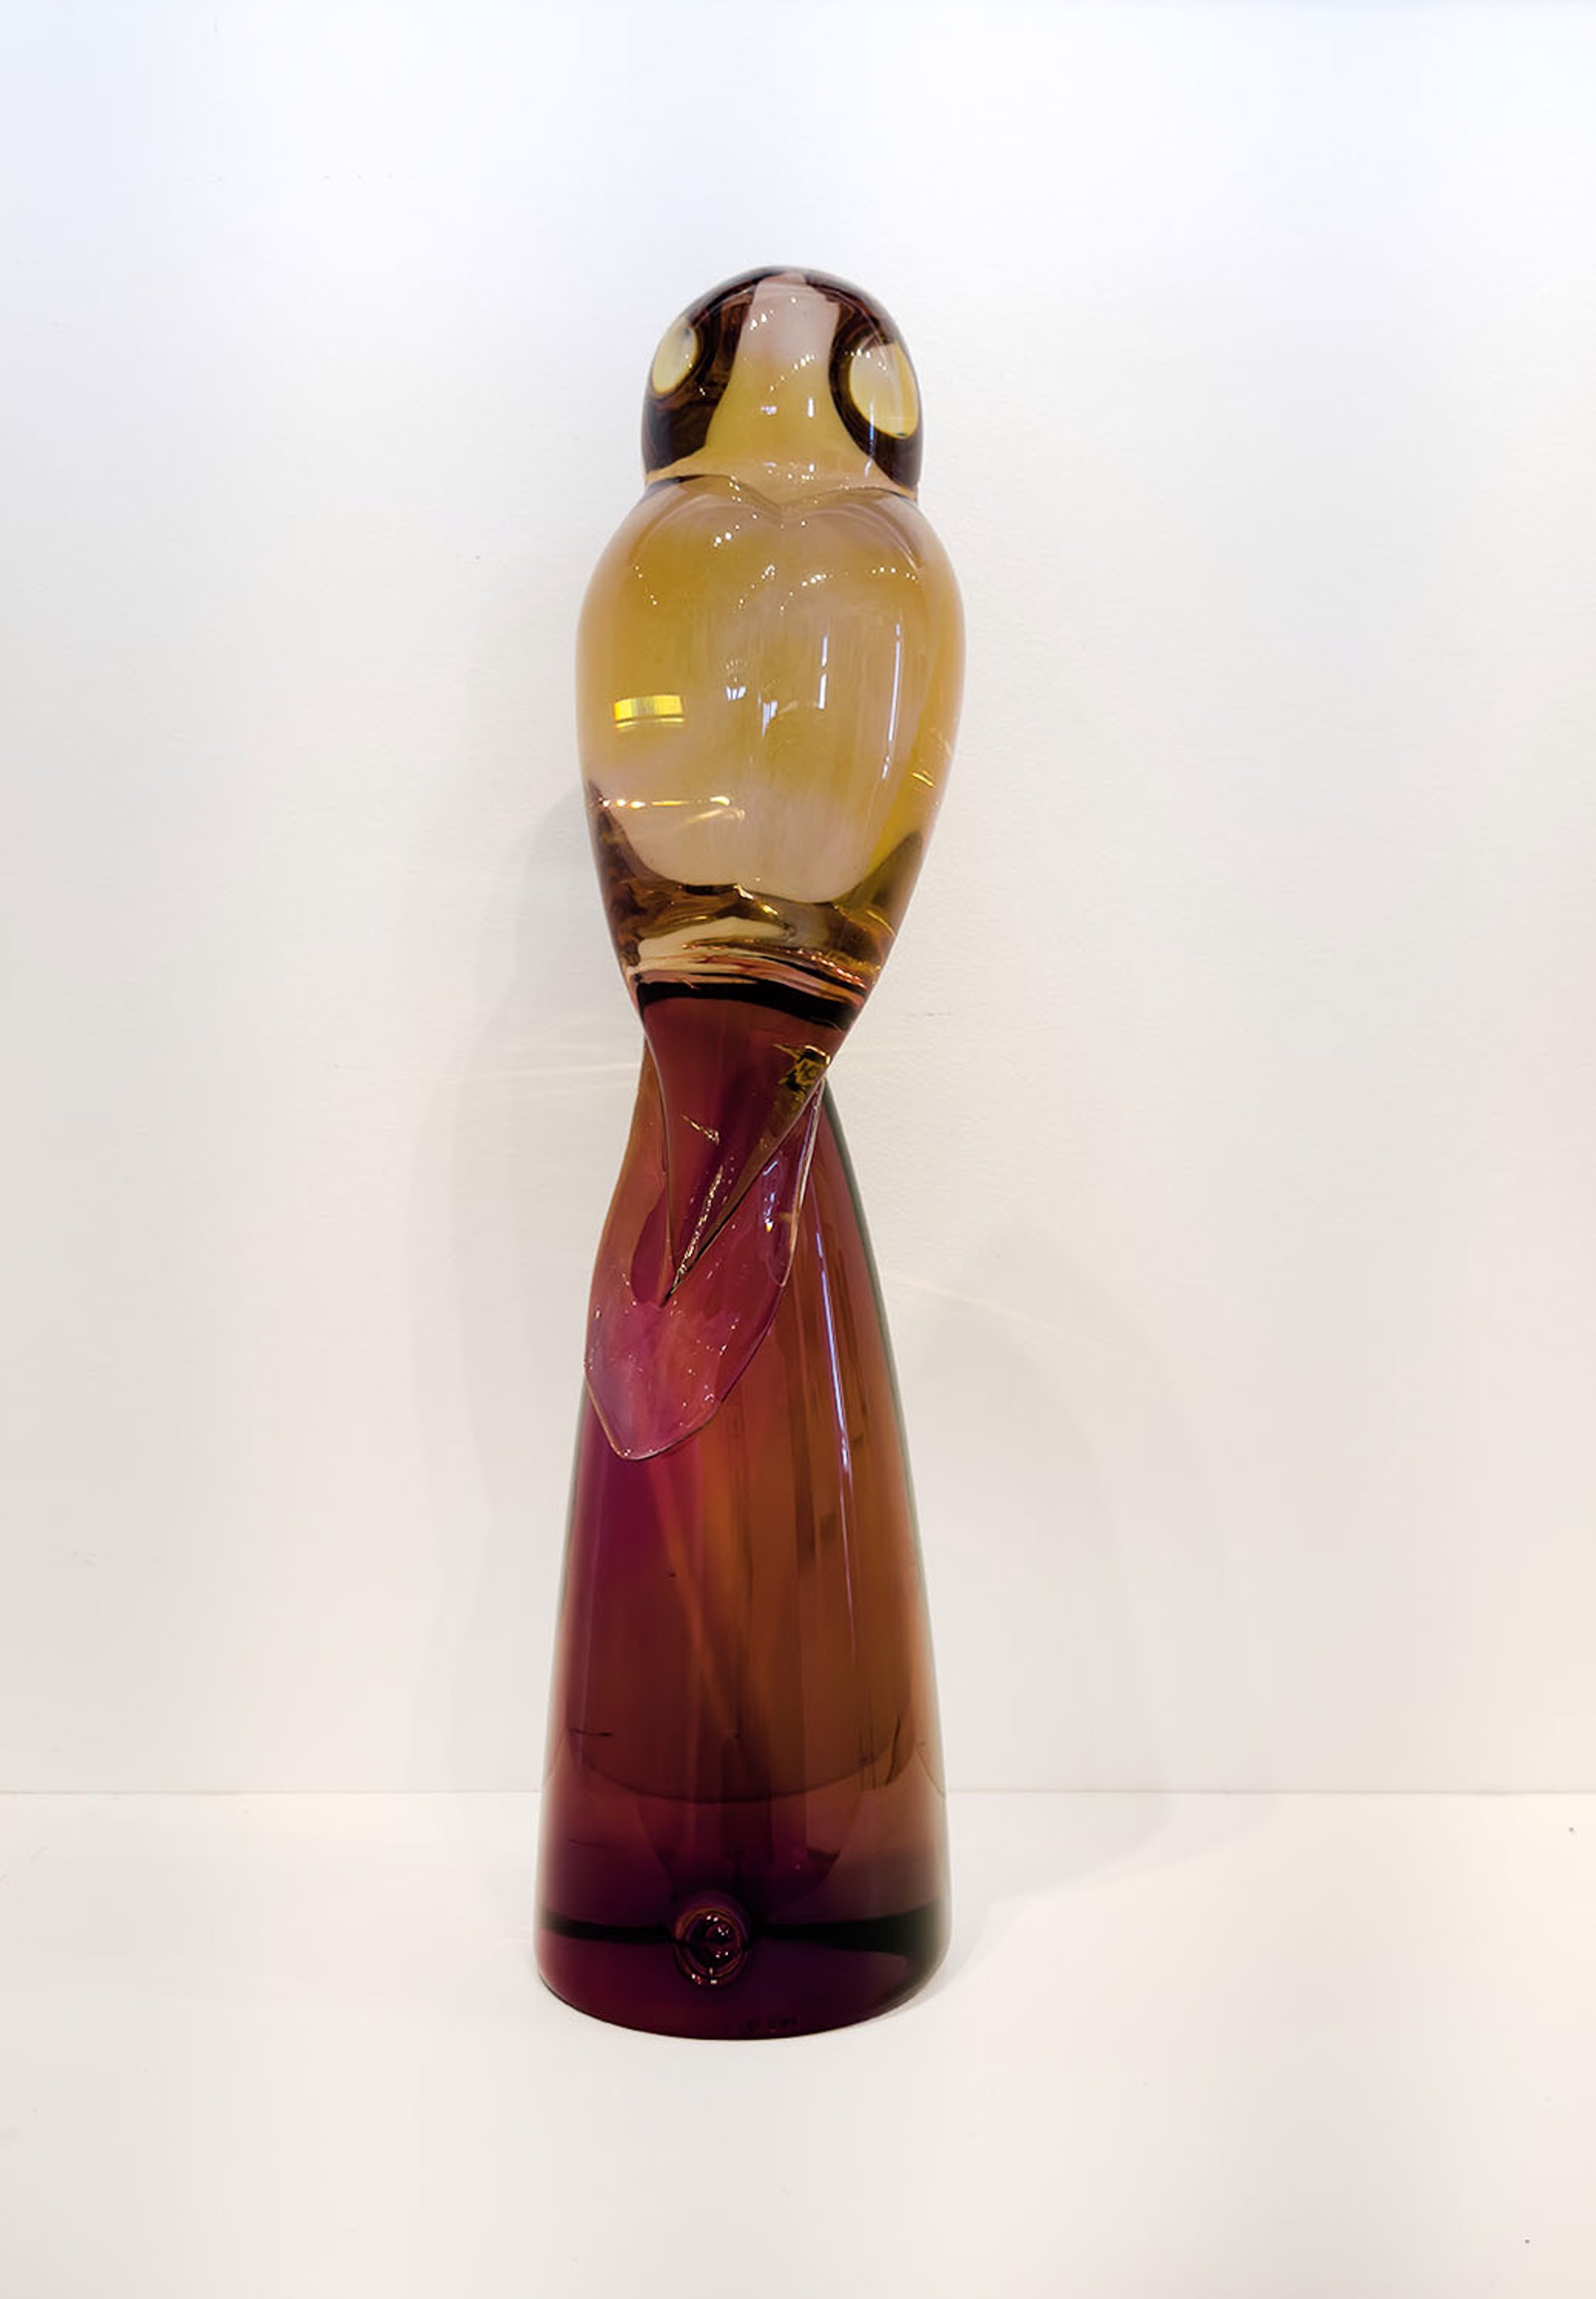 Original Hand Blown Glass Sculpture By Dan Friday Featuring A Yellow Owl Perched On Magenta Totem